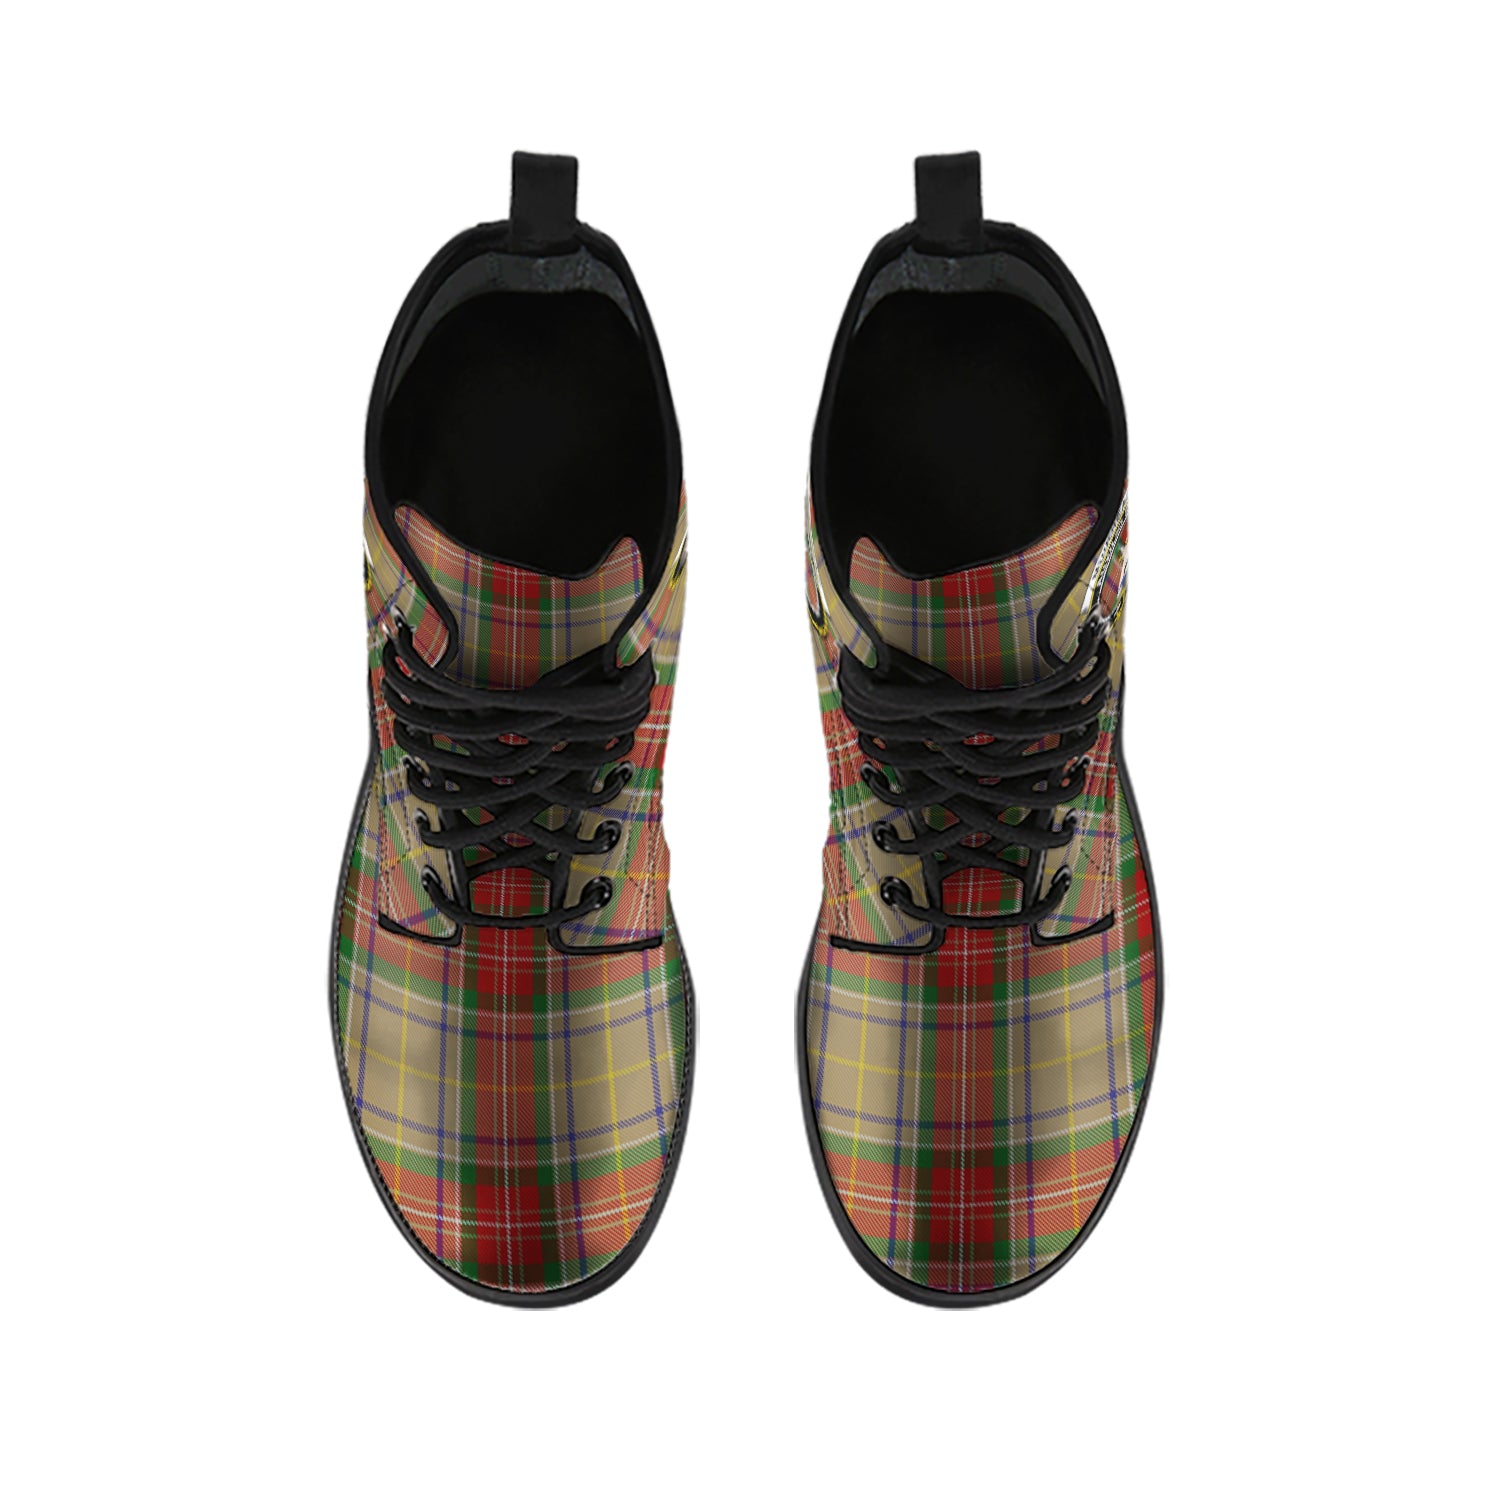 muirhead-old-tartan-leather-boots-with-family-crest